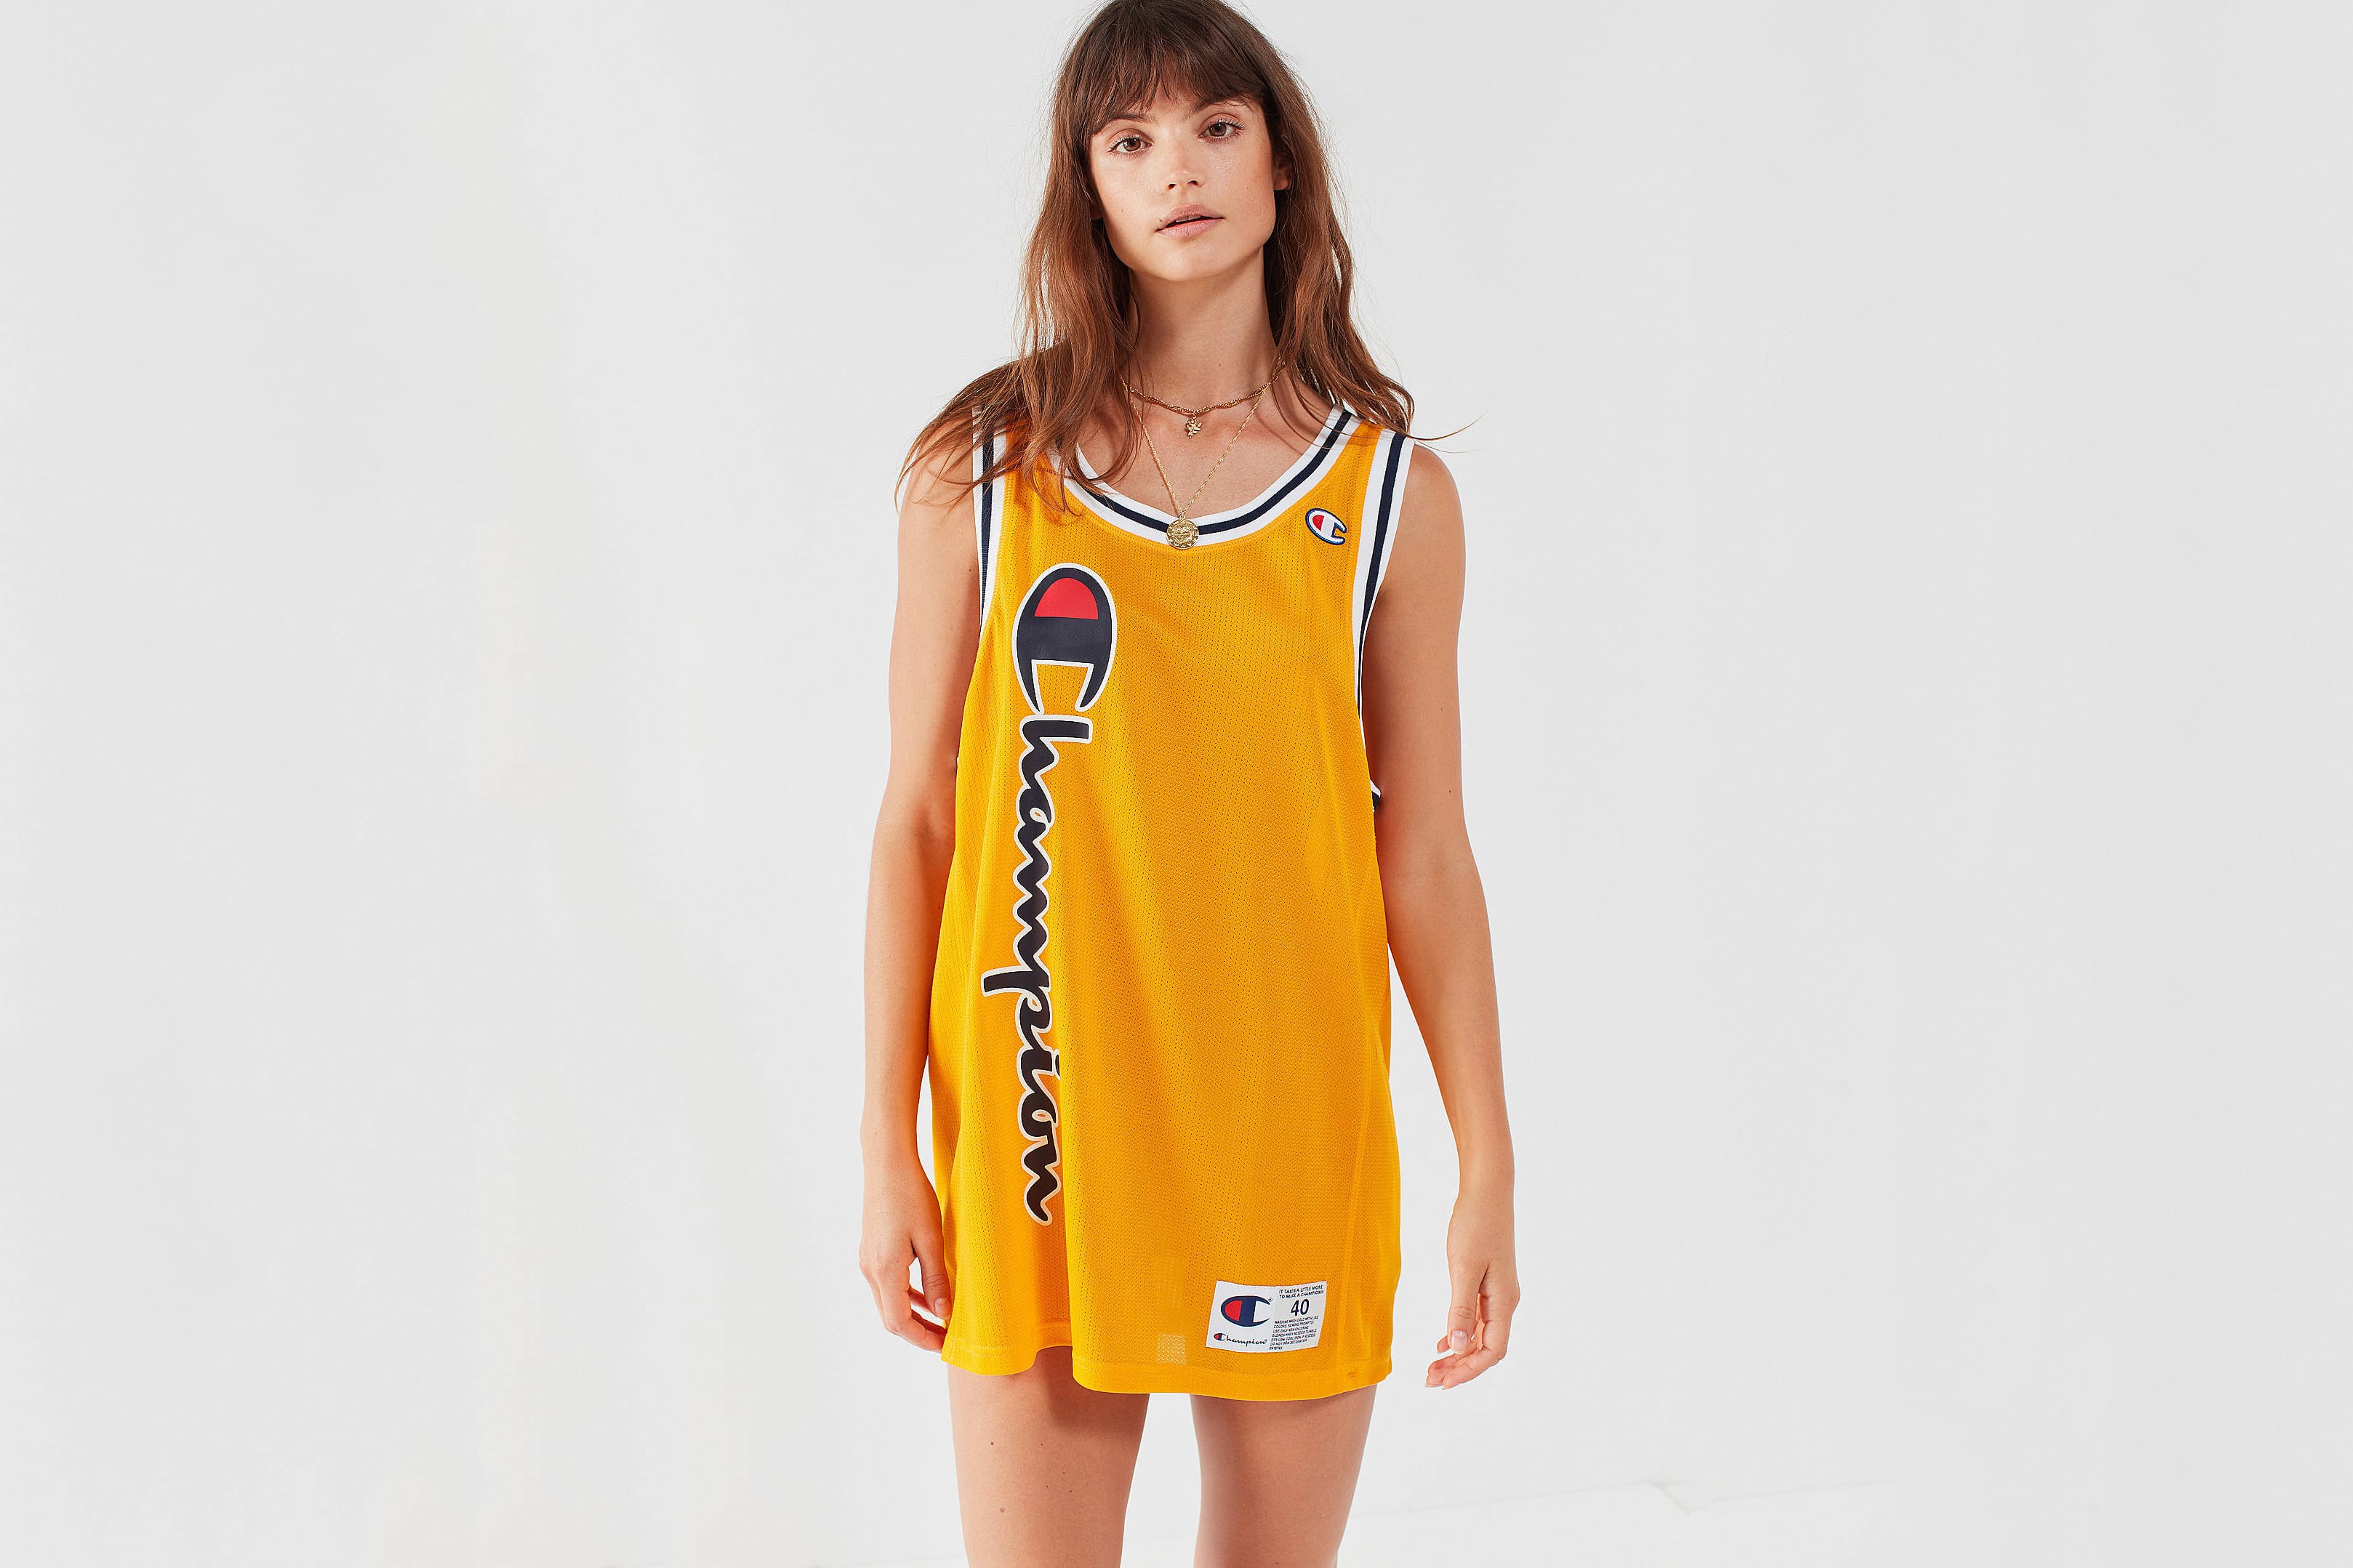 Champion's City Mesh Jersey Is a Sporty 